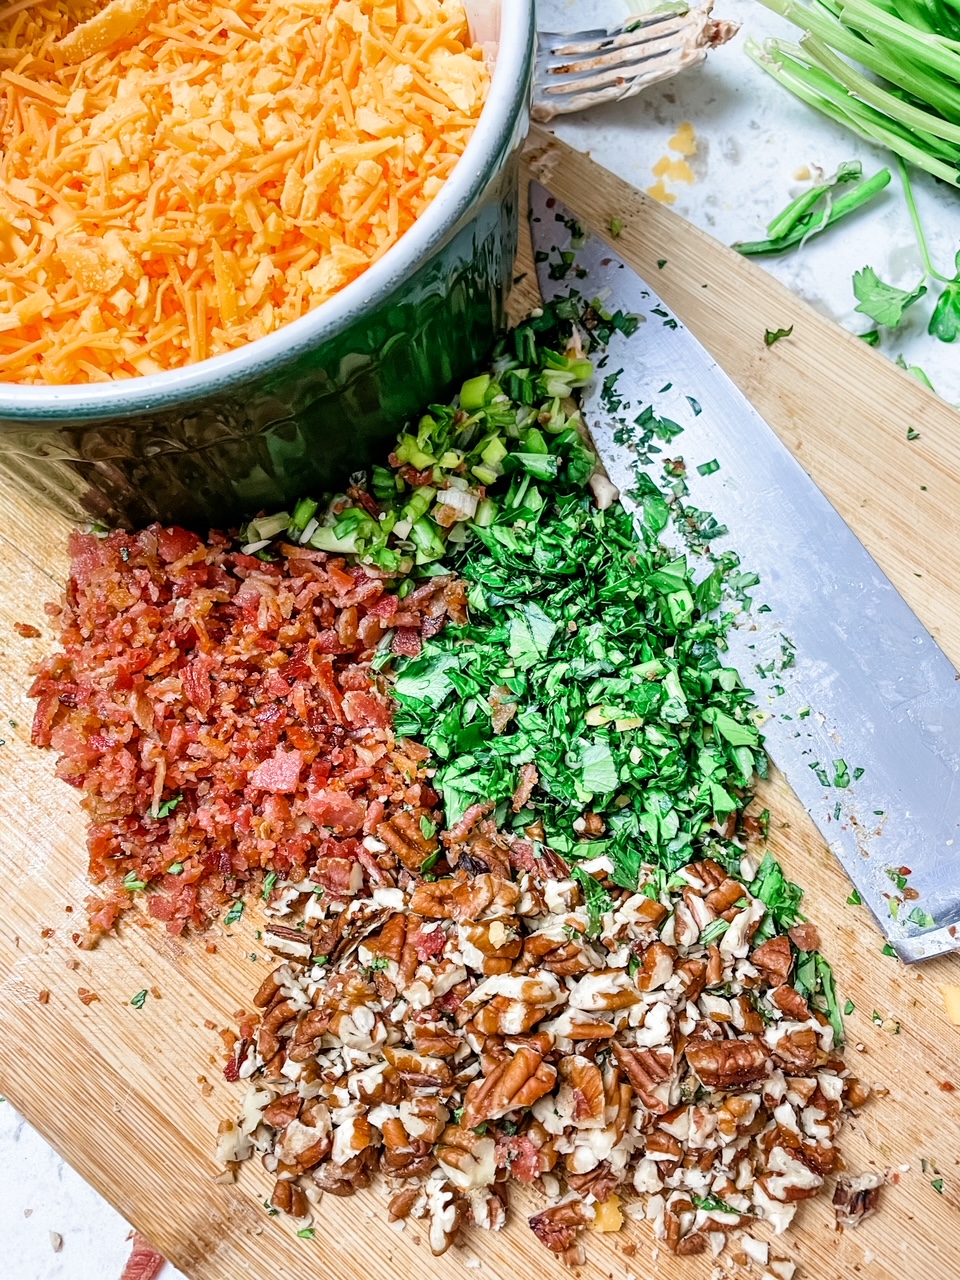 Some of the ingredients - bacon, pecans, and green onion - chopped up on a cutting board